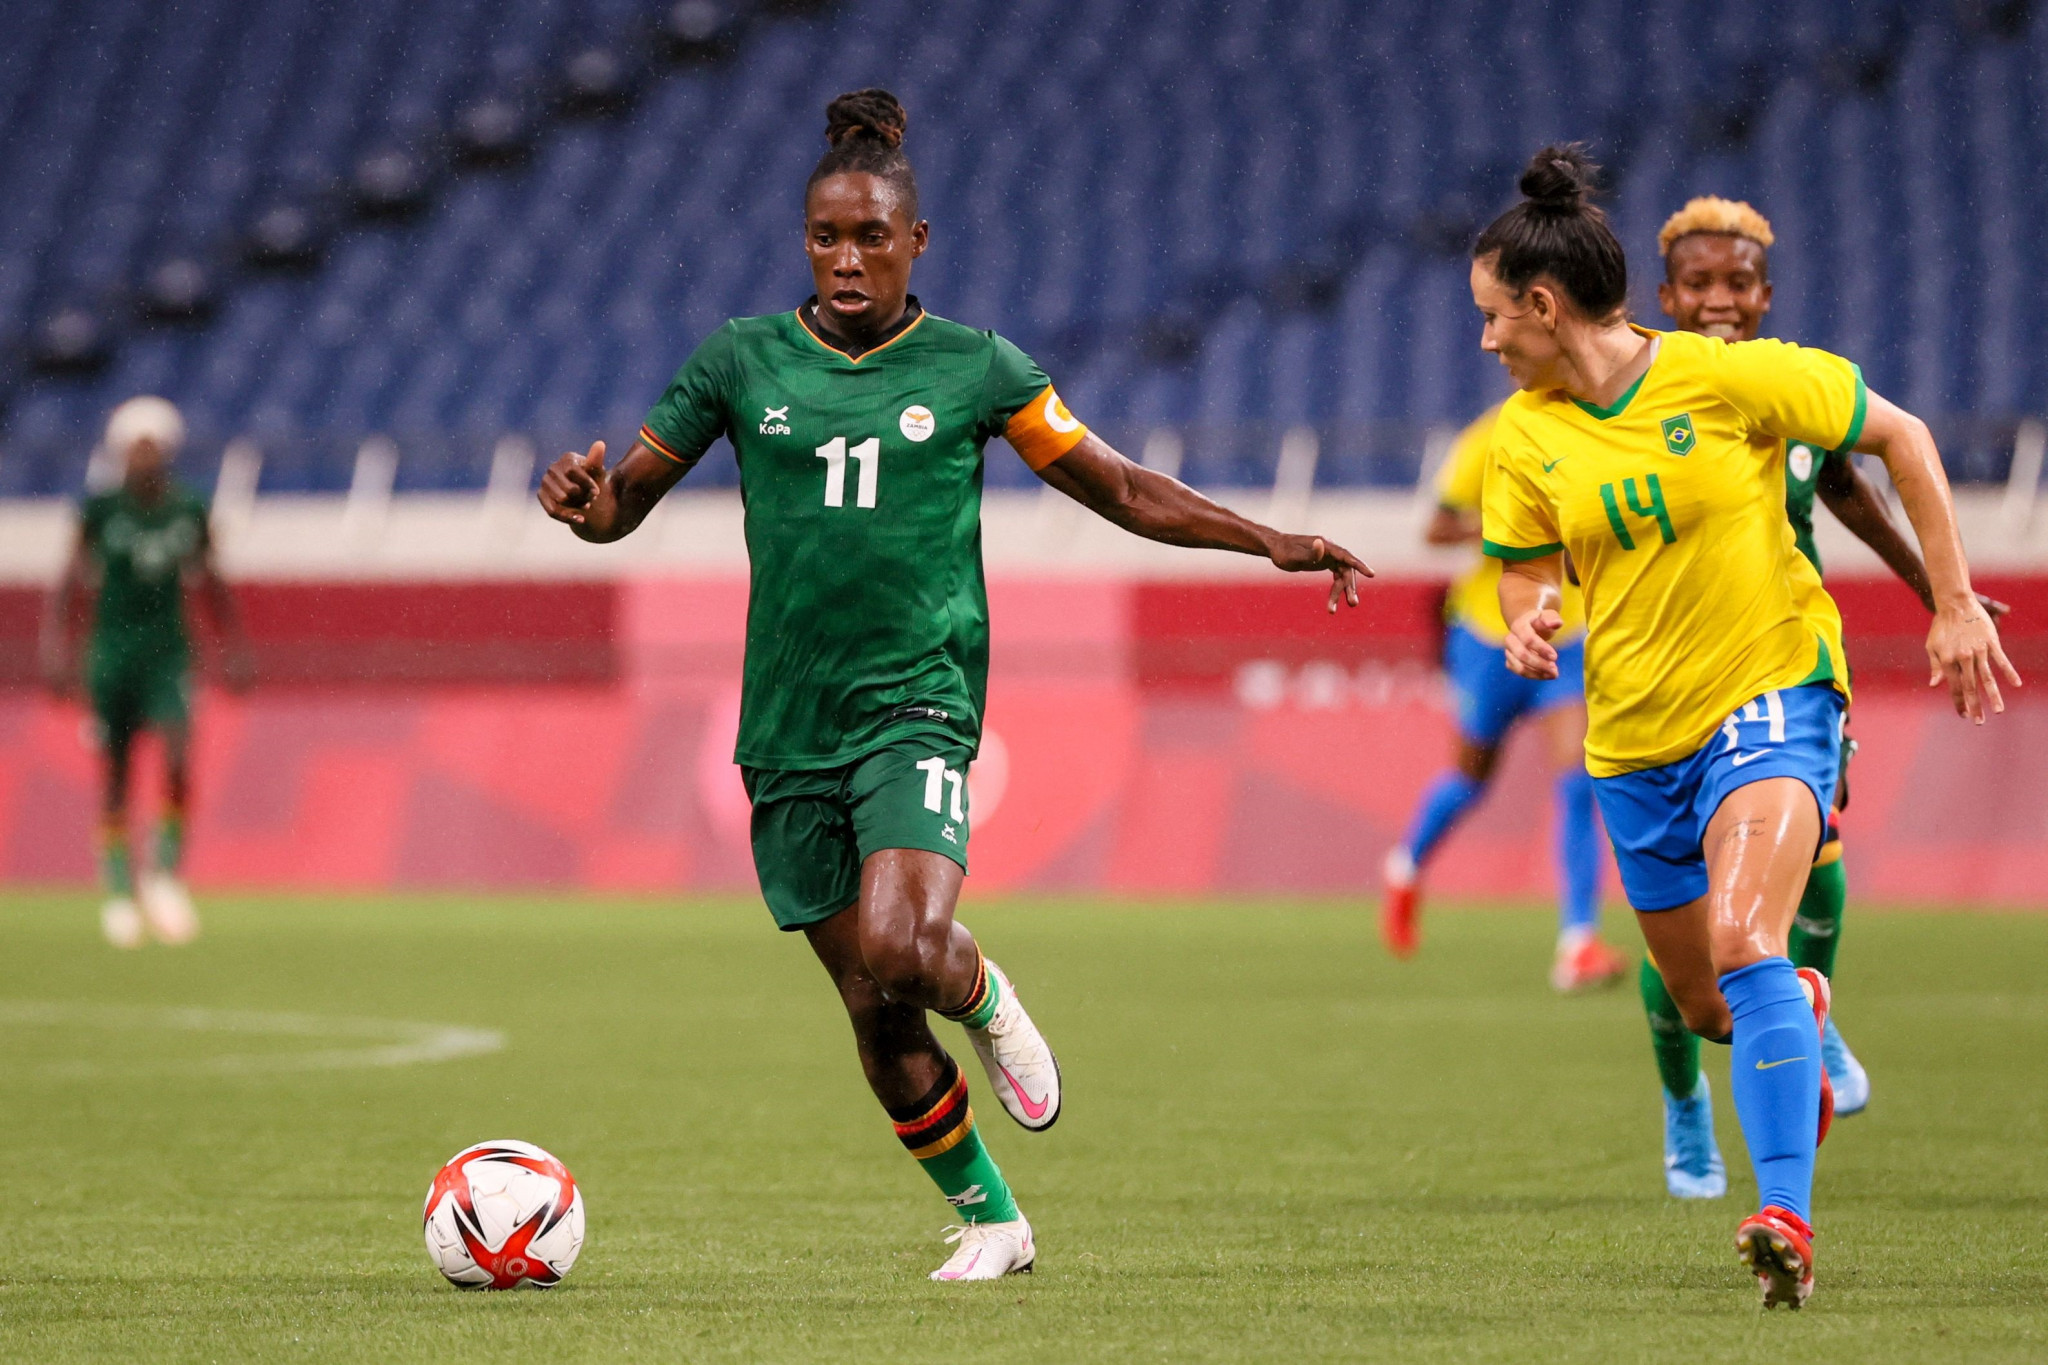 Barbra Banda is expected to play at the FIFA Women's World Cup after being ruled out of the 2022 Women’s Africa Cup of Nations following a failed gender eligibility test ©Getty Images